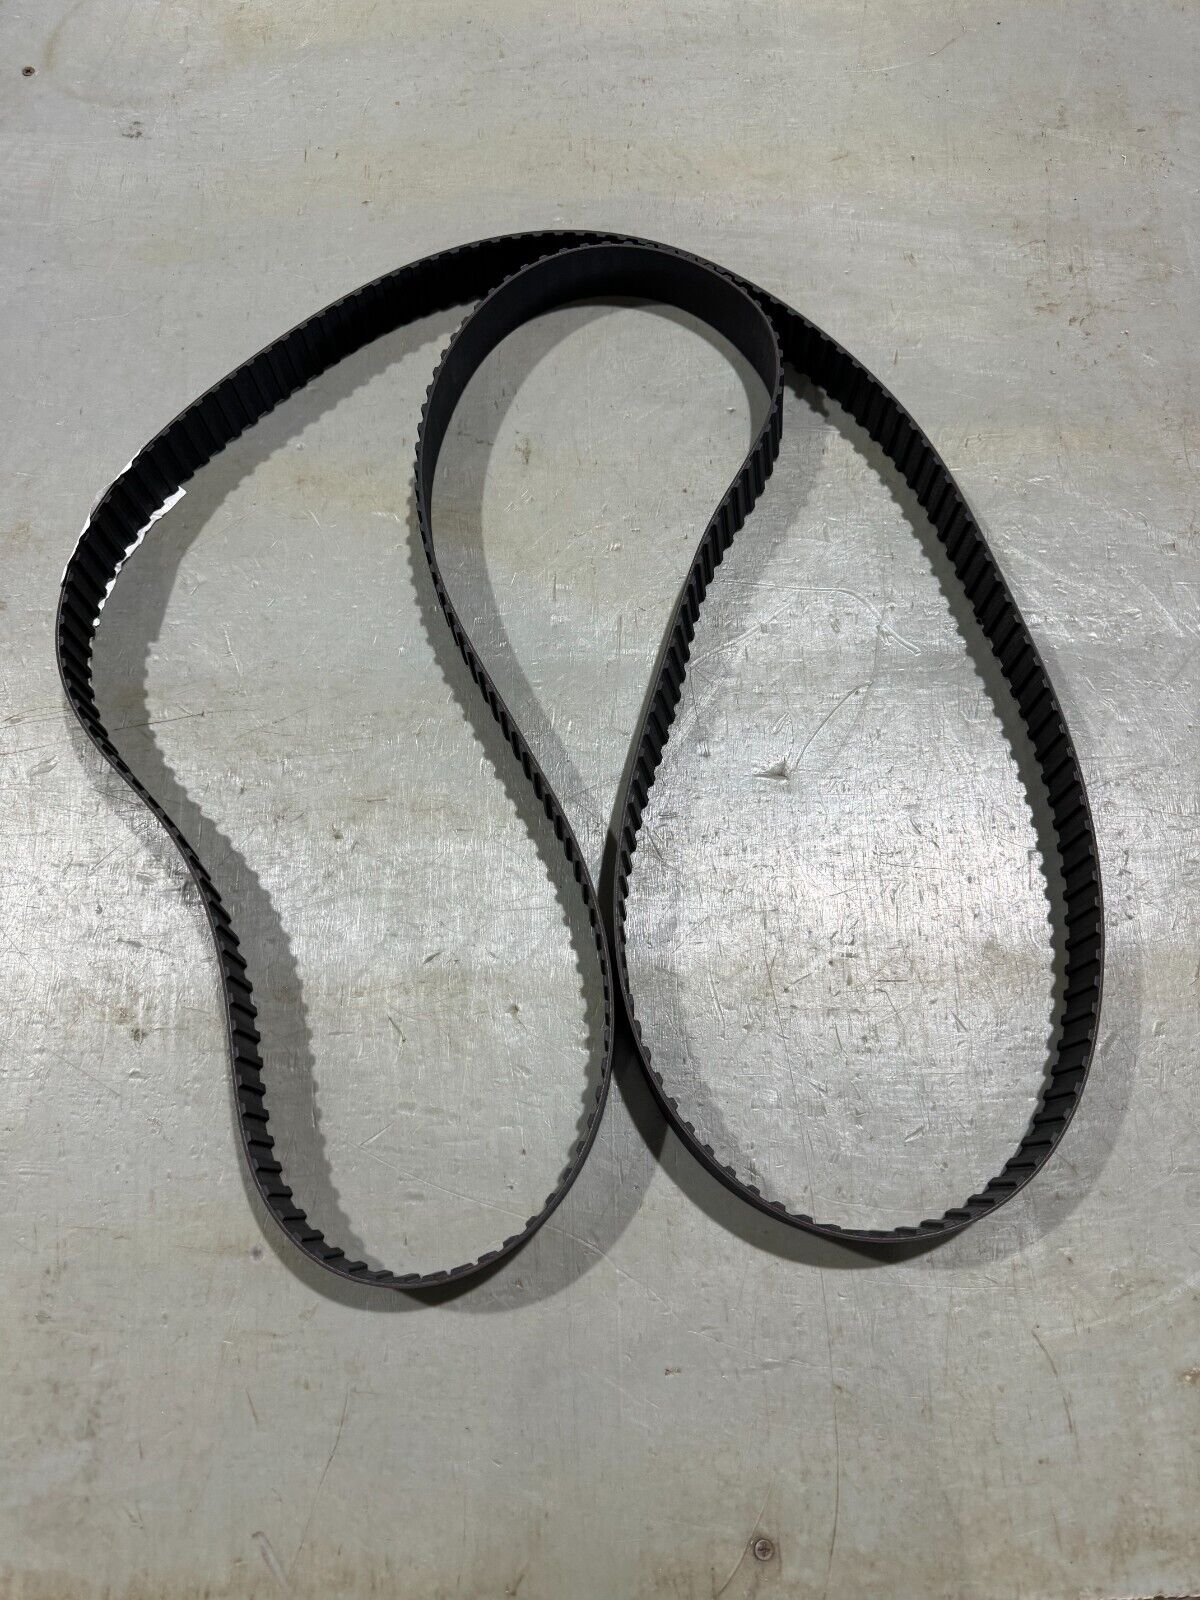 FACTORY NEW GOODYEAR SYNCHRONOUS Trapezoidal TIMING BELT 1140H150